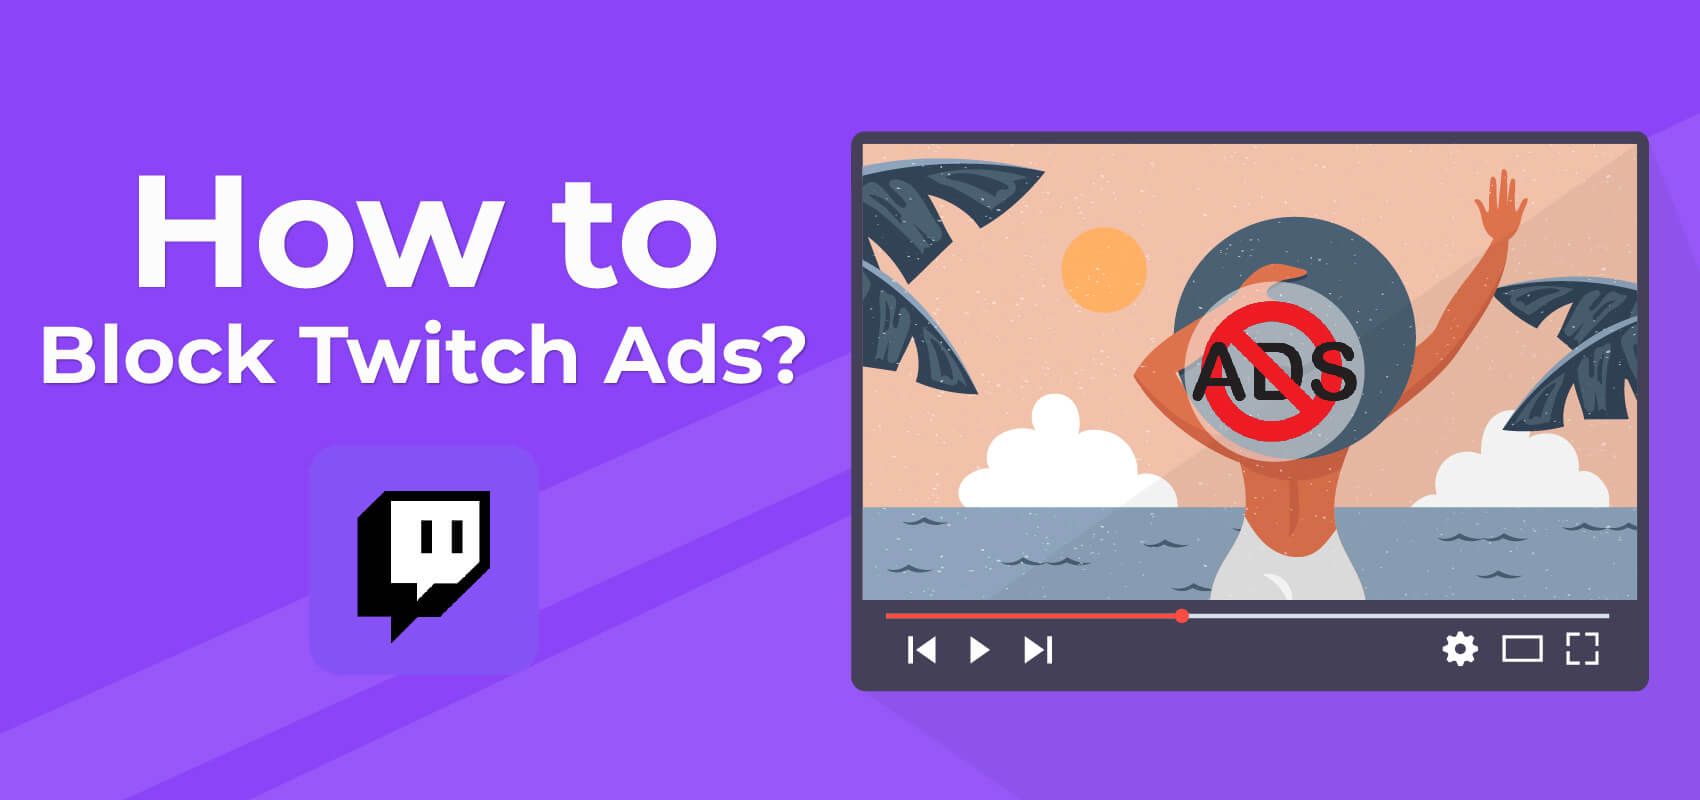 How to block twitch ads?